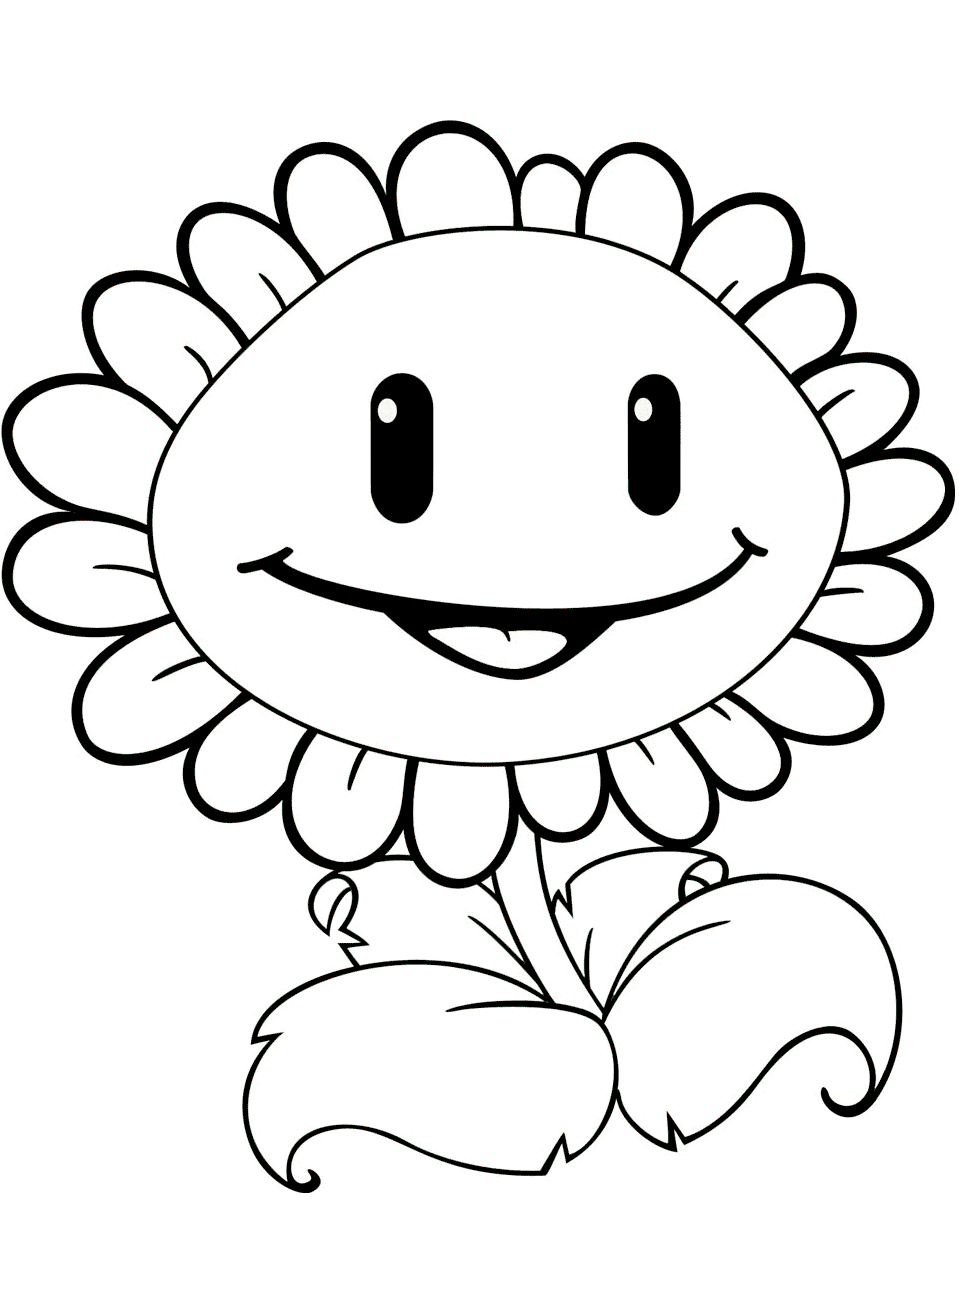 Sunflower In Plants Vs. Zombies Coloring Page - Free Printable Coloring